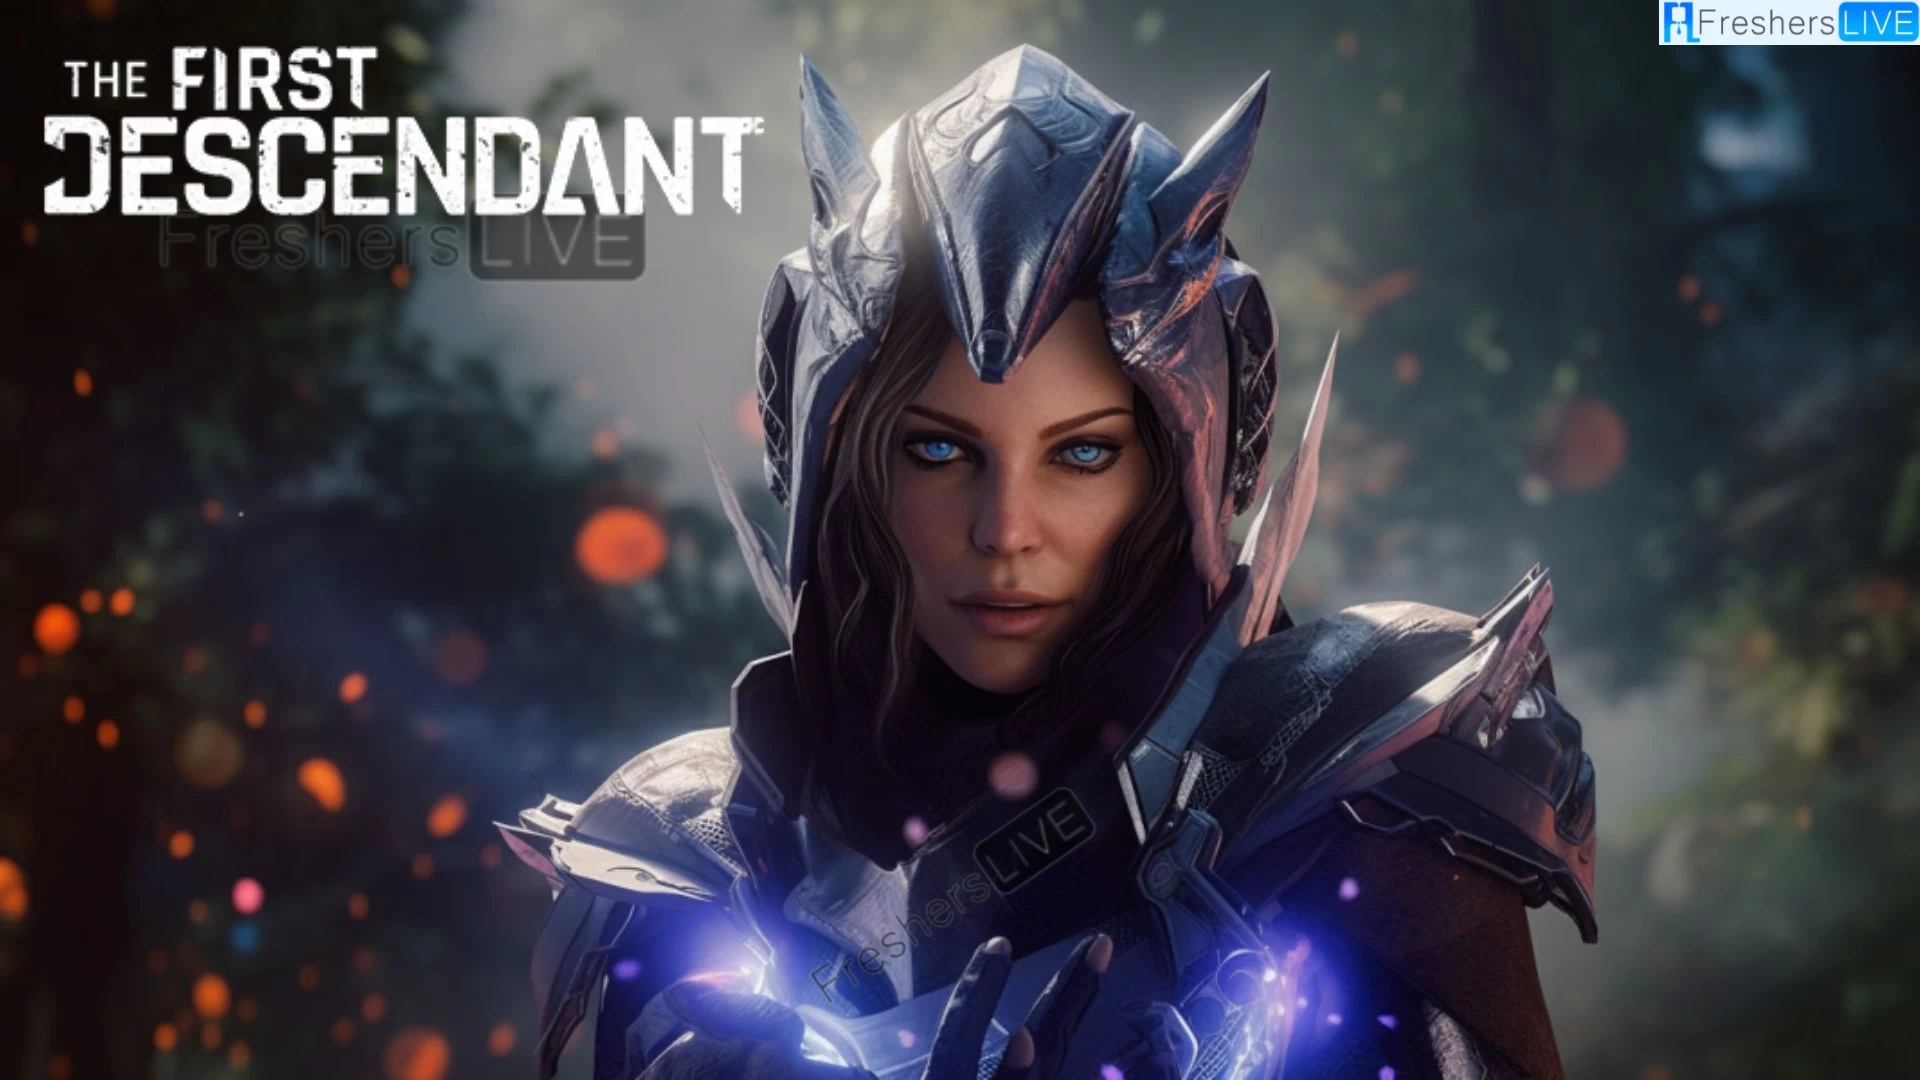 Is the First Descendant Multiplayer? How Many People Can Play the First Descendant?